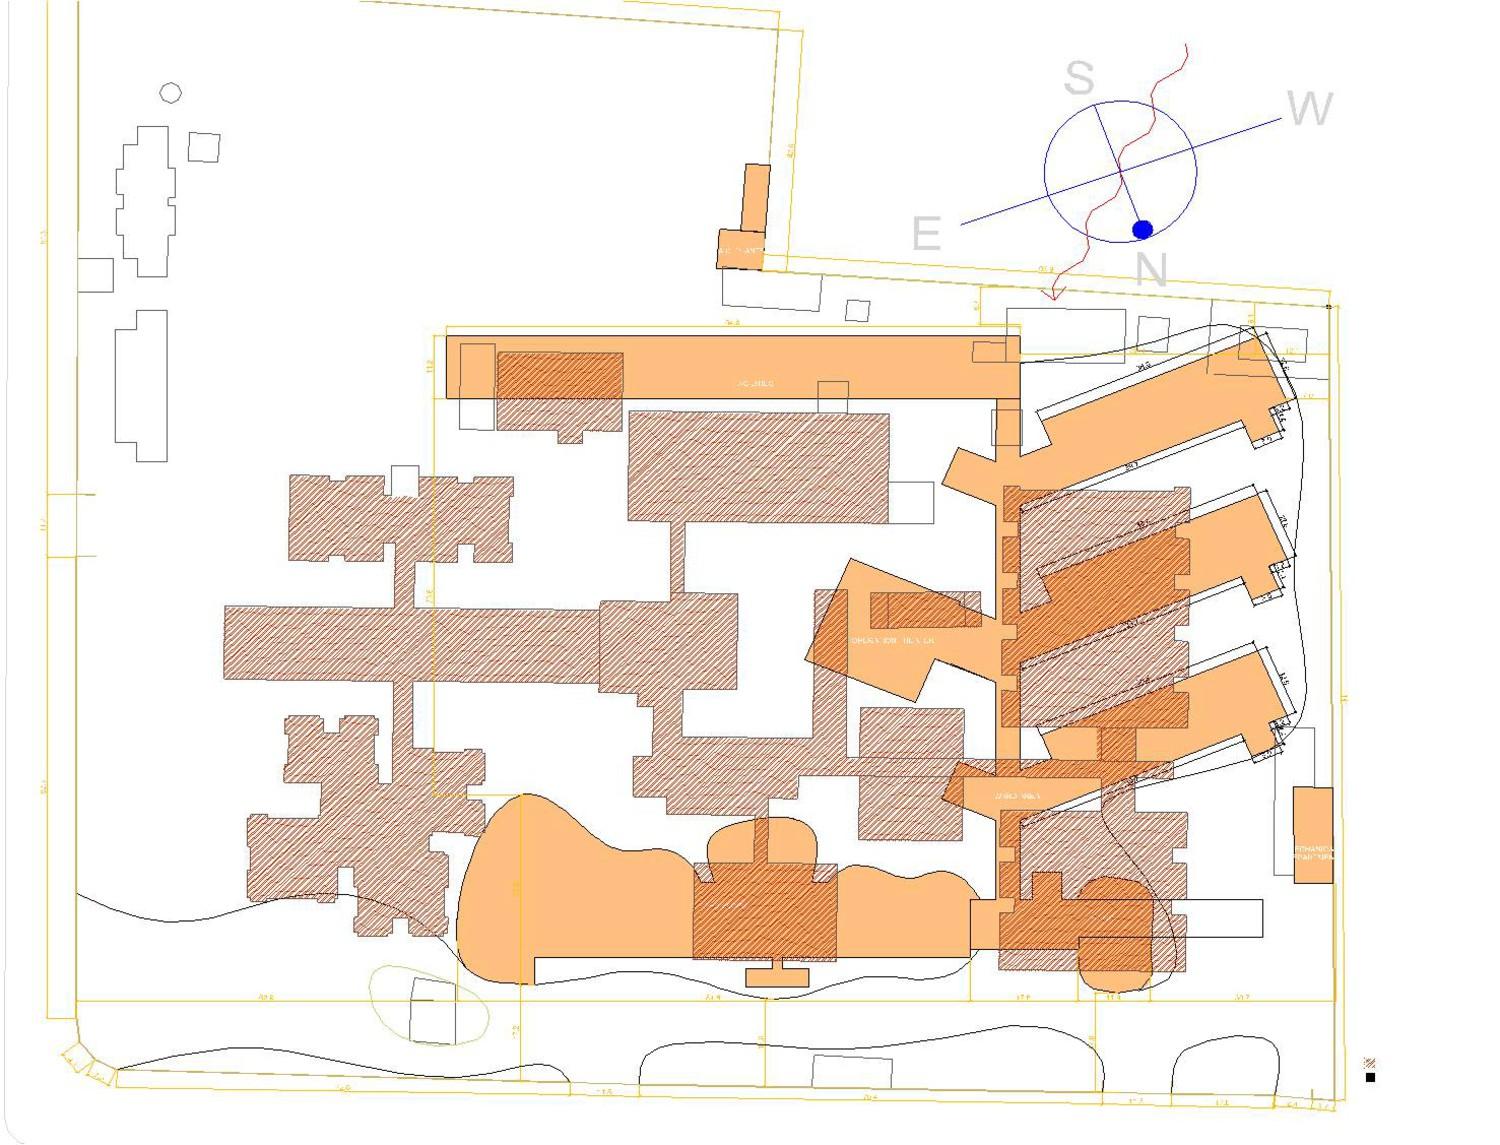 Site plan - new and existing buildings